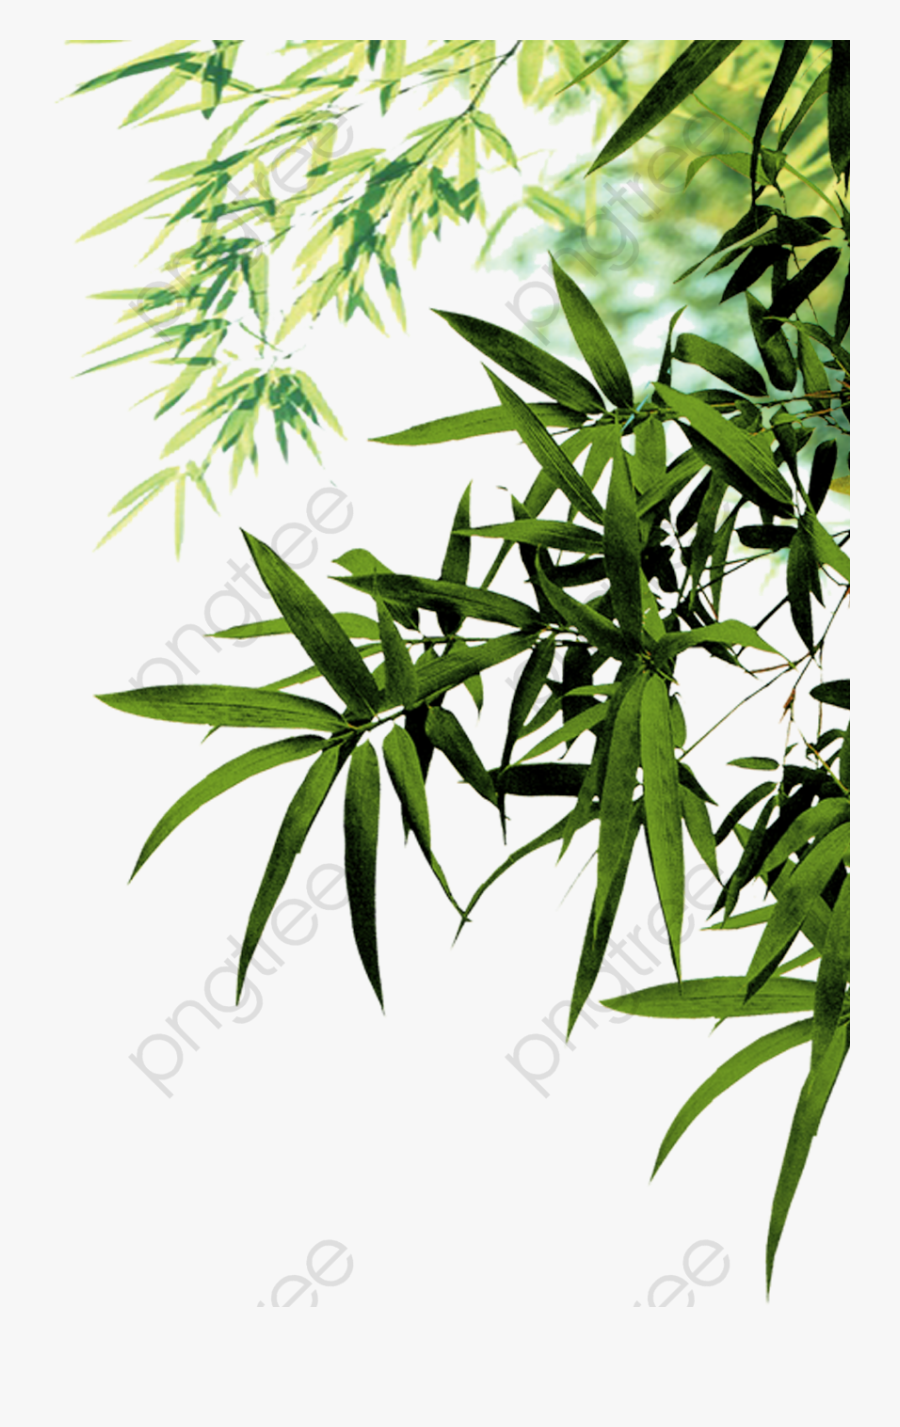 Green Leaf Clipart Image - Bamboo Png, Transparent Clipart